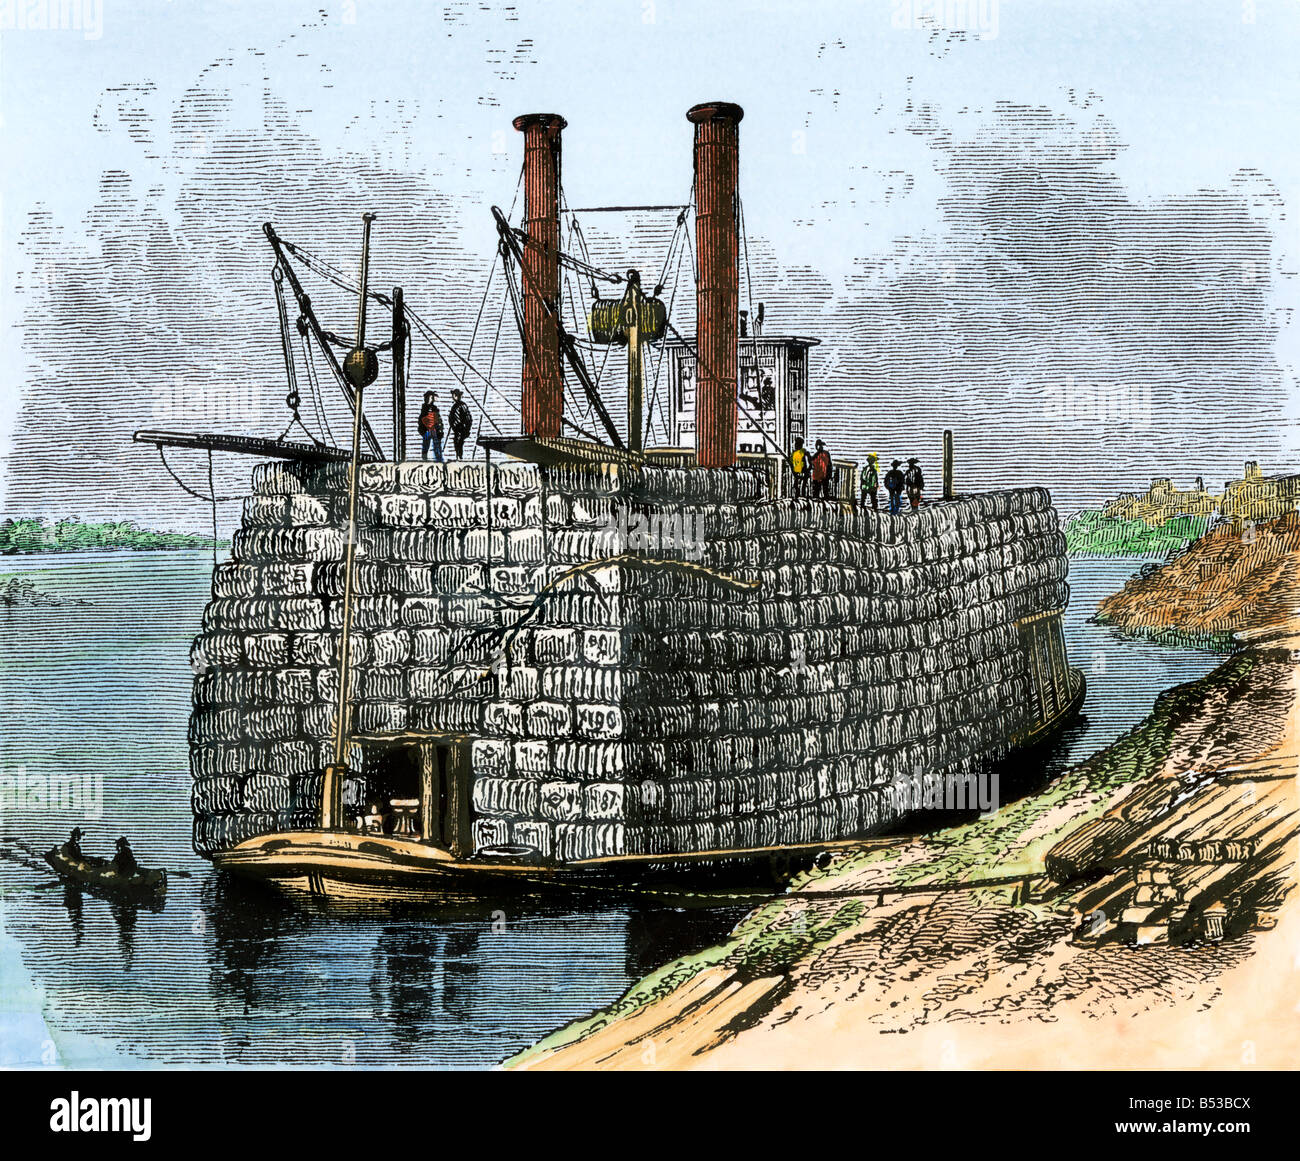 Steam-driven boat loading bales of cotton at a plantation pier 1800s. Hand-colored woodcut Stock Photo